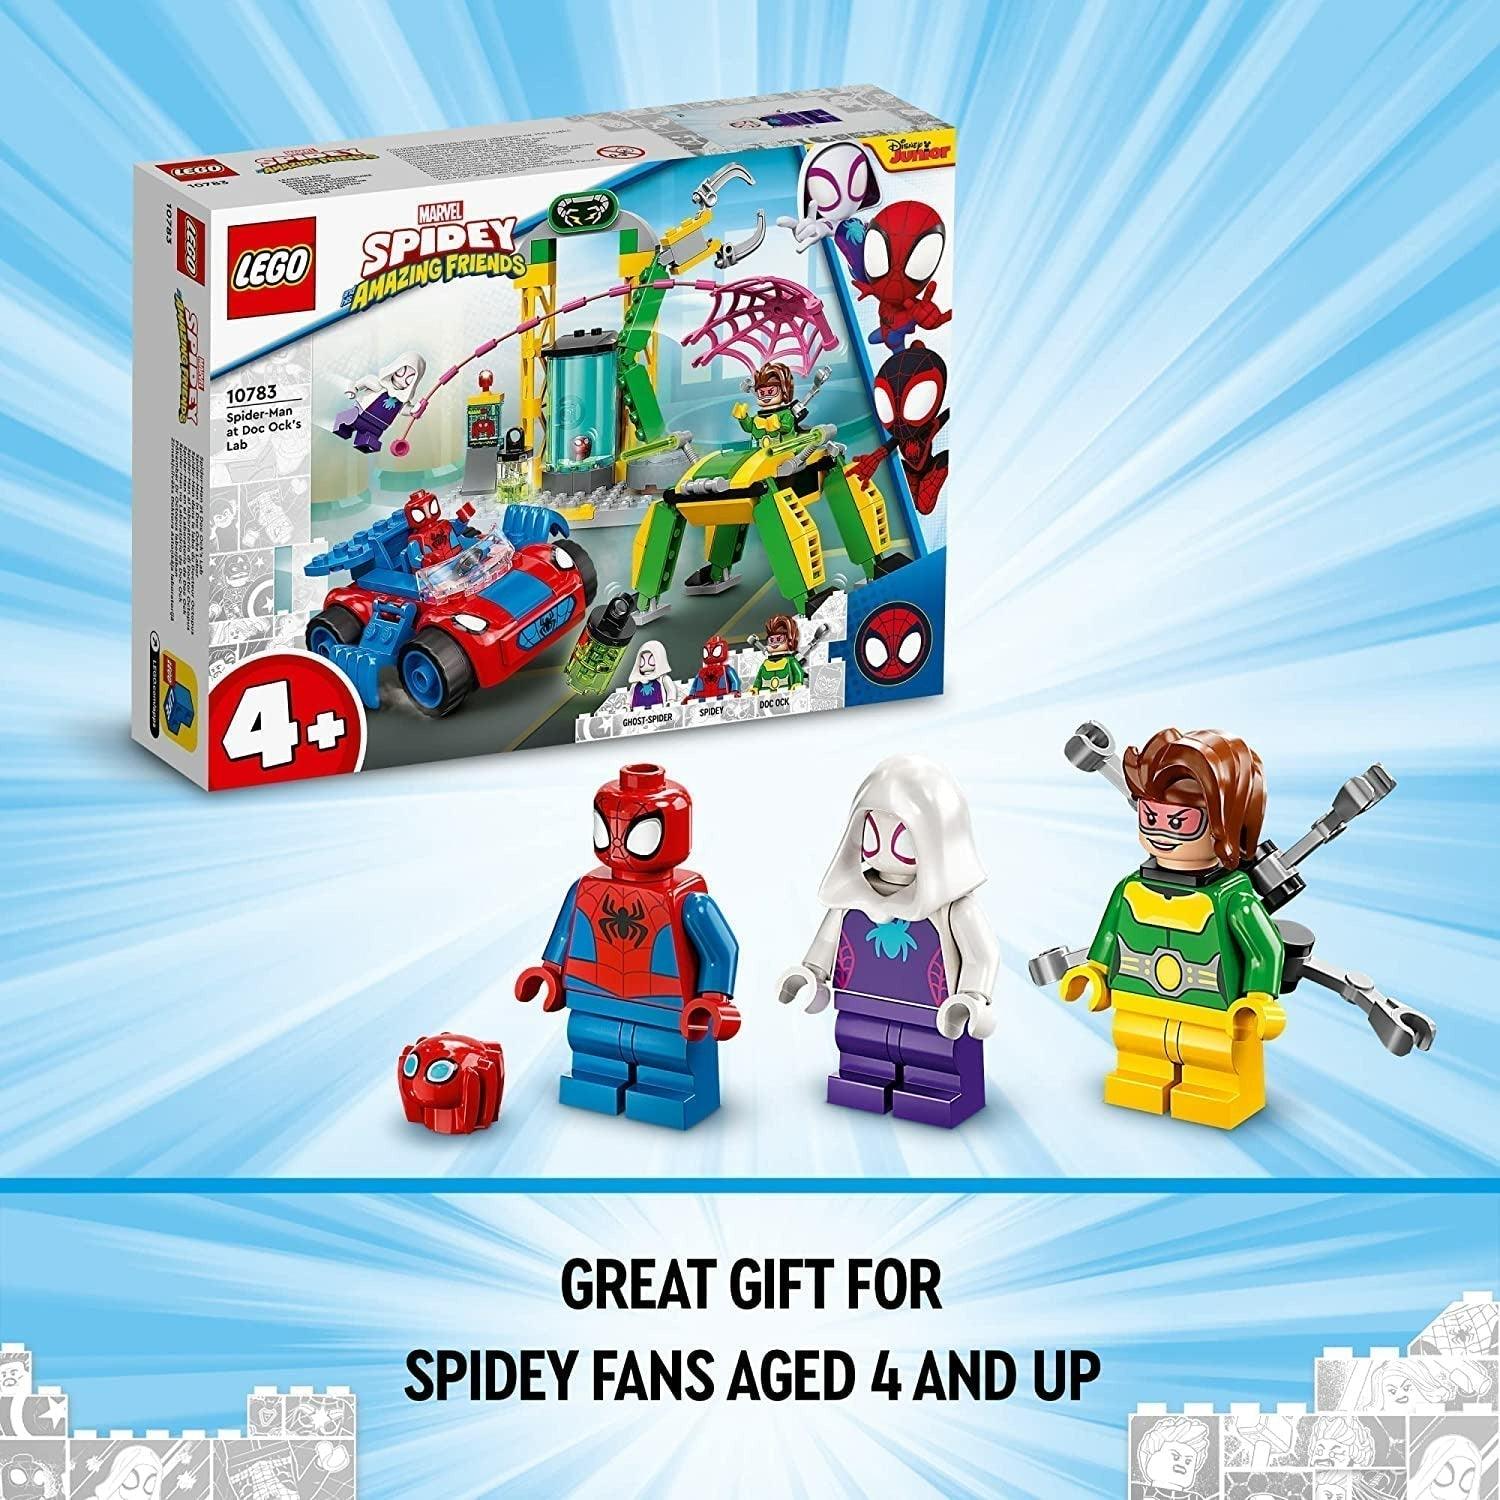 LEGO 10783 Marvel Spidey and His Amazing Friends Spider-Man at Doc Ock’s Lab Building Kit (131 Pieces) - BumbleToys - 4+ Years, 5-7 Years, Avengers, Boys, Figures, LEGO, Marvel, OXE, Pre-Order, Spider man